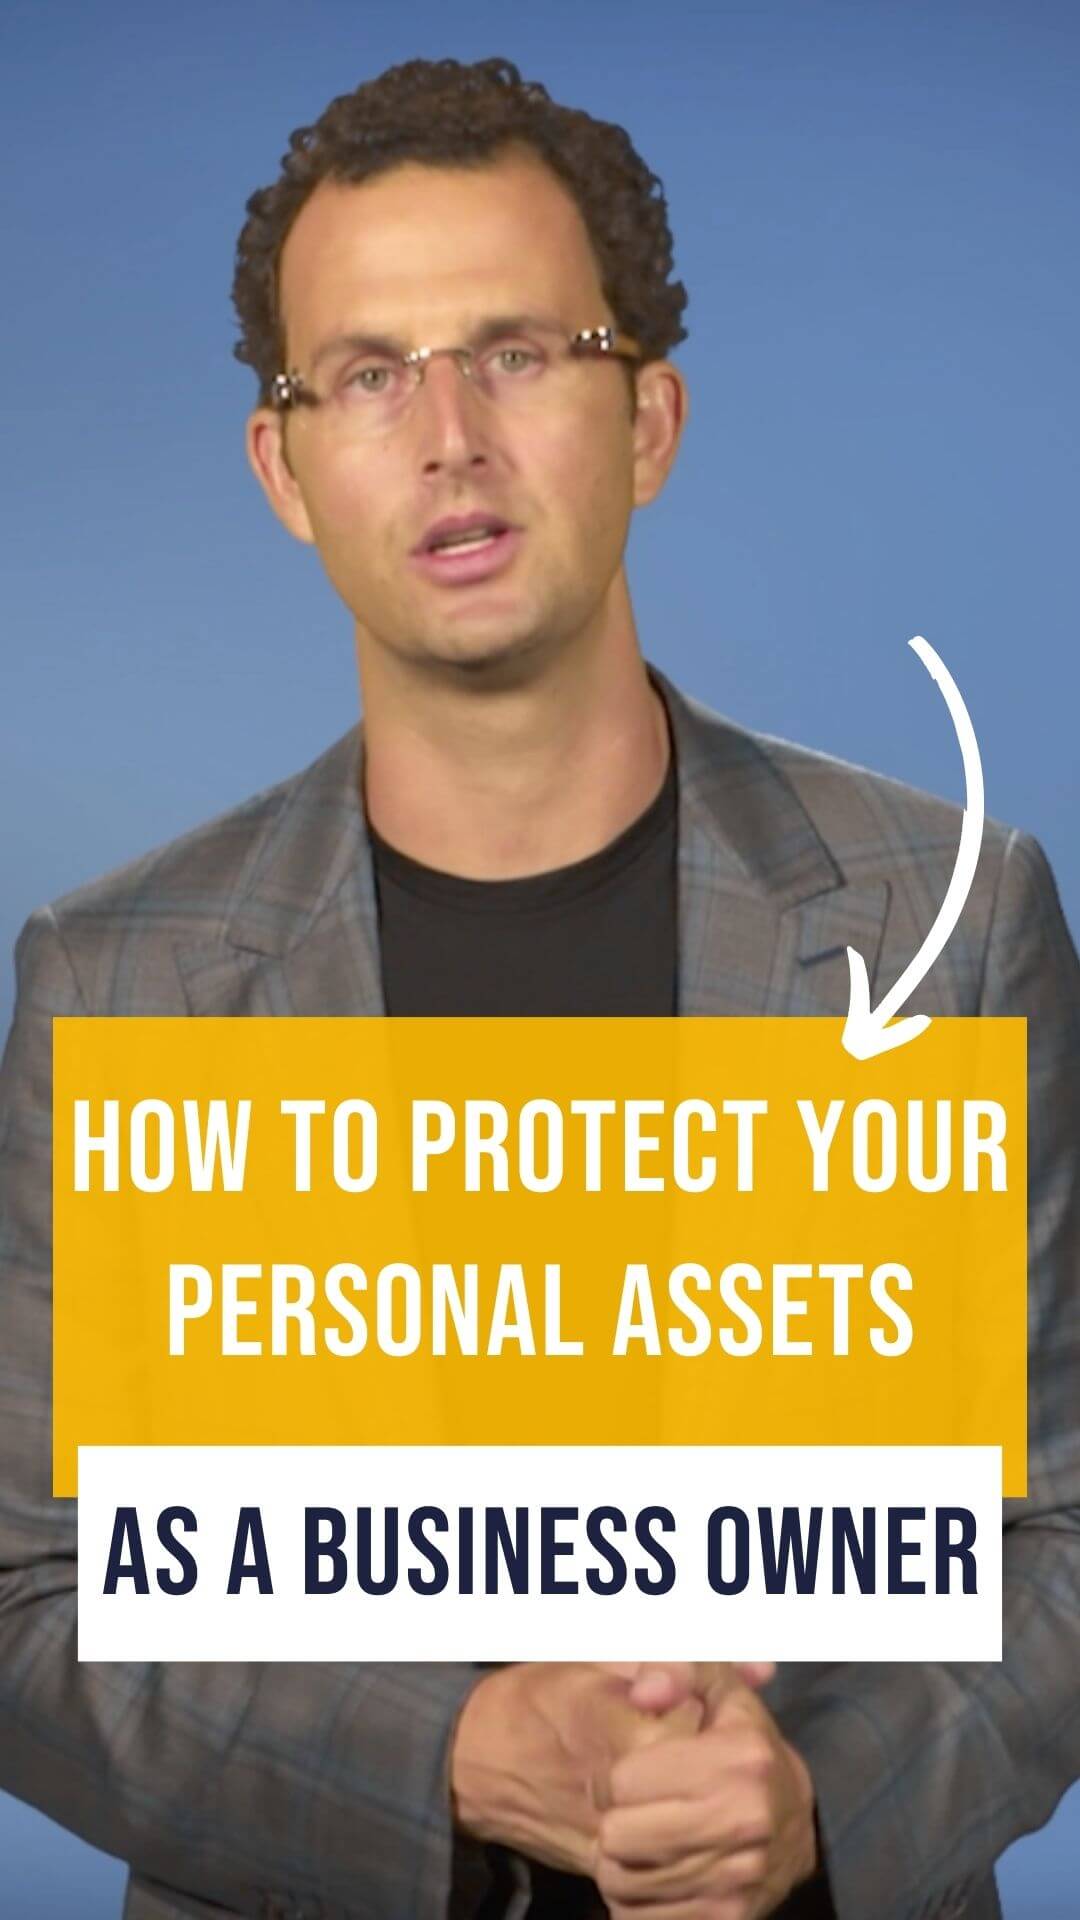 How to protect your personal assets as a business owner